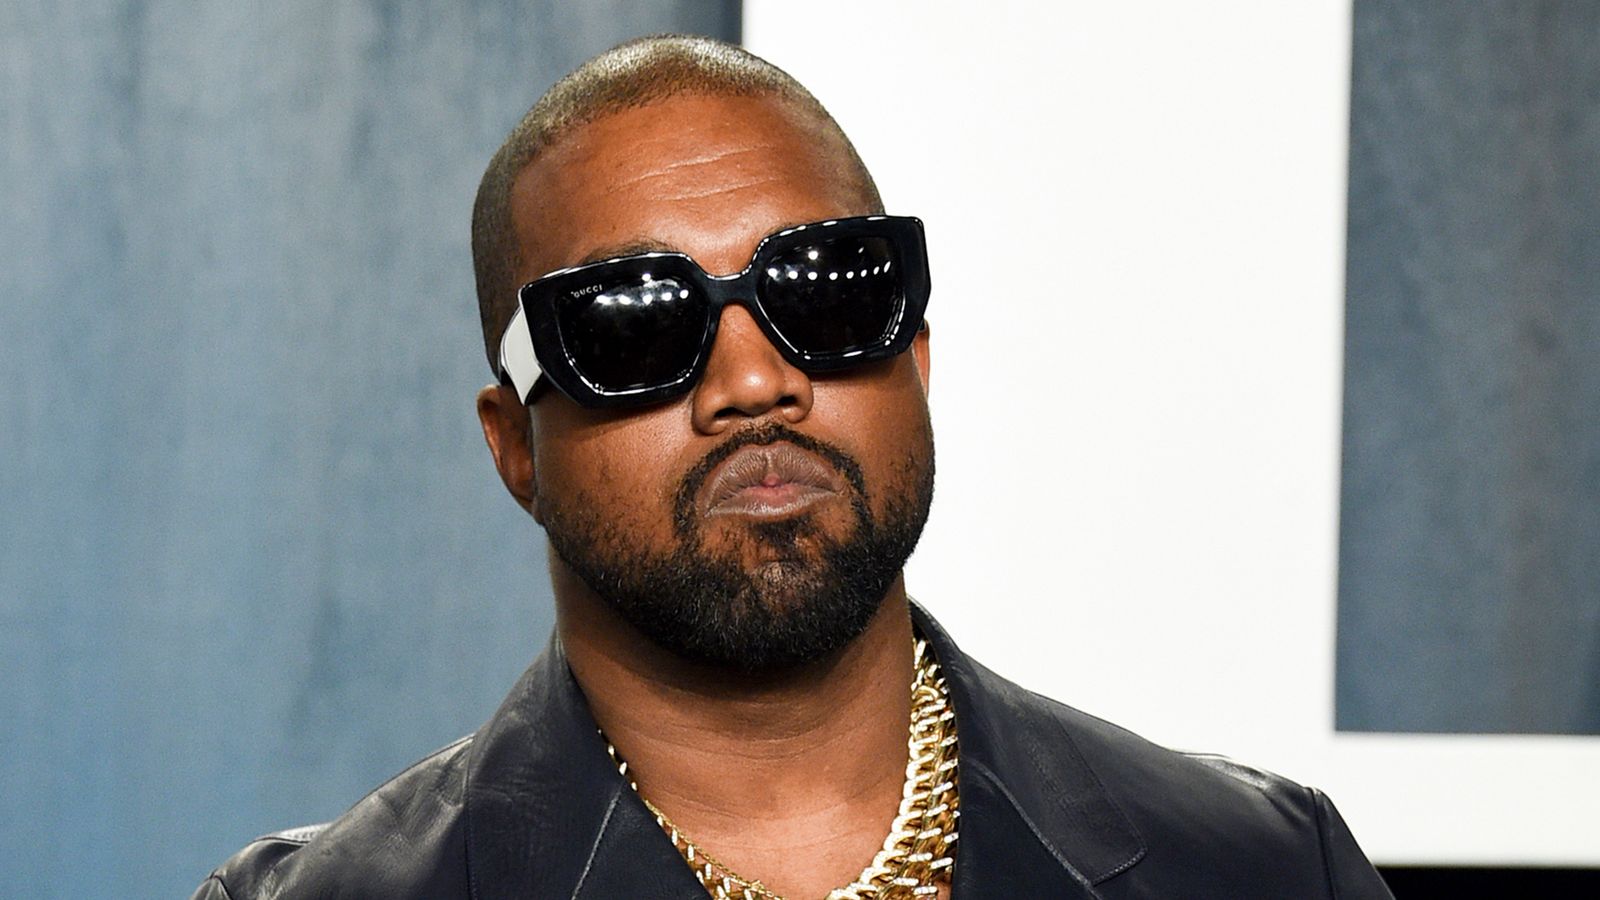 Kanye West could be denied entry to Australia over antisemitic comments | Ents & Arts News